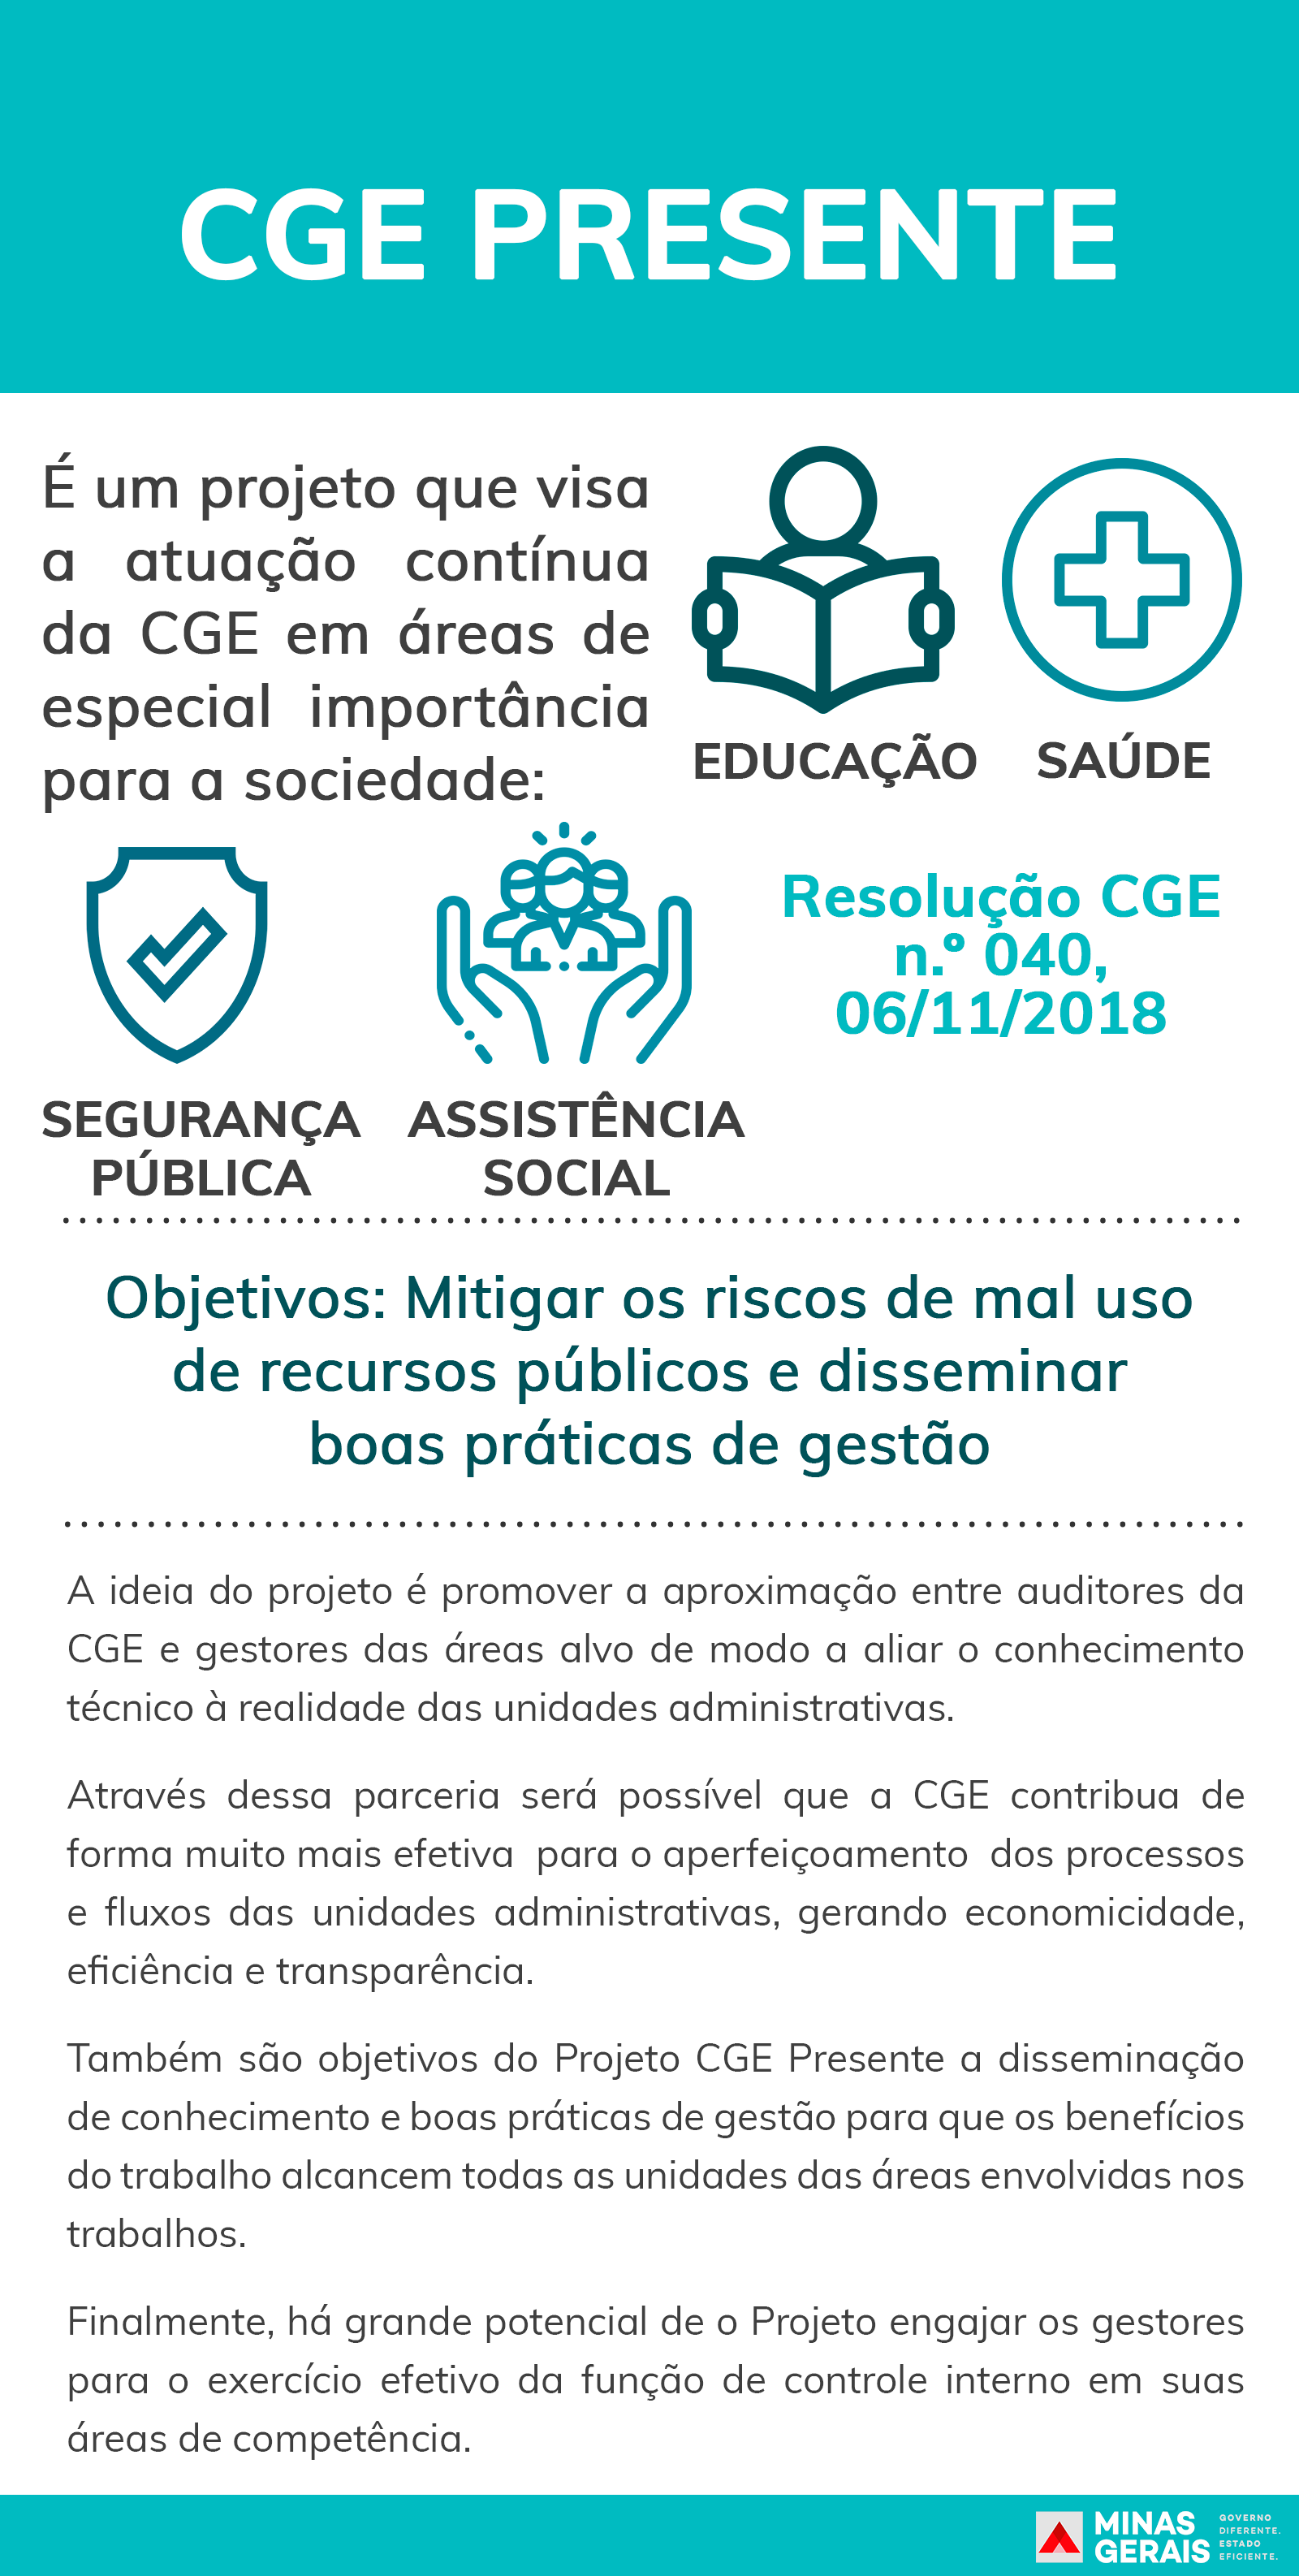 CGE-Presente_info.png